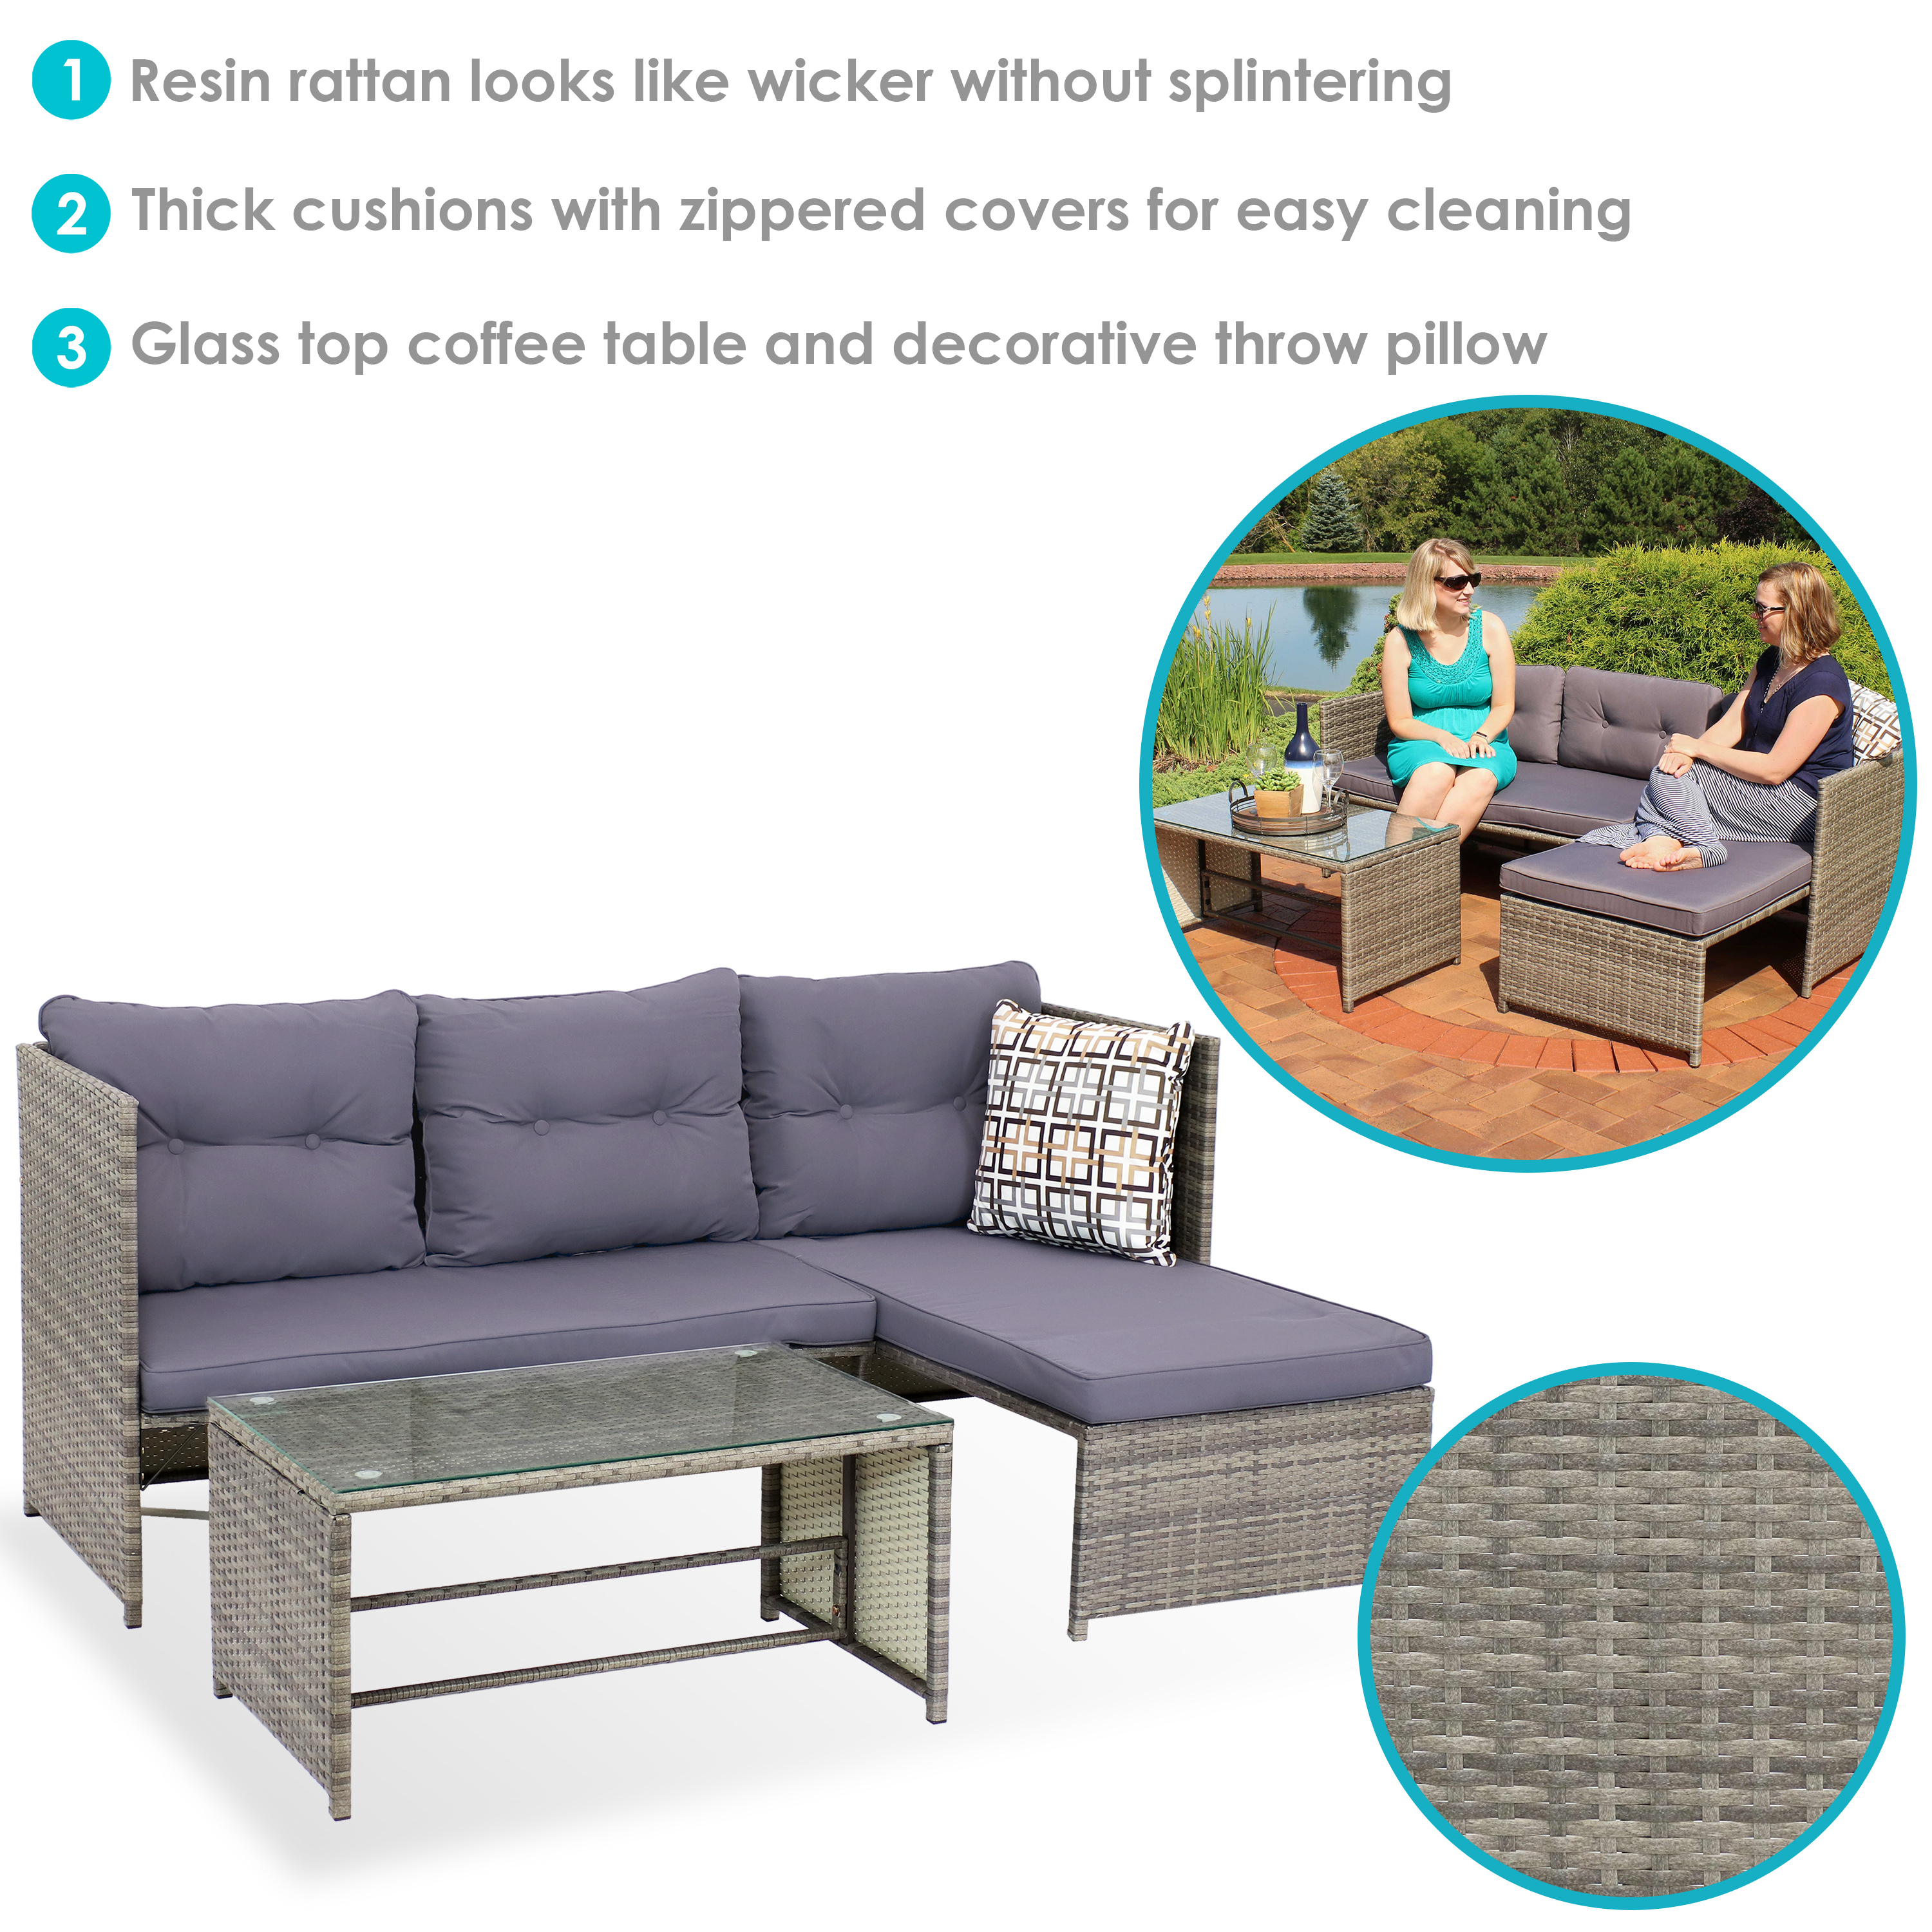 Sunnydaze Longford Outdoor Patio Sectional Sofa Set with Cushions - Charcoal - image 4 of 12